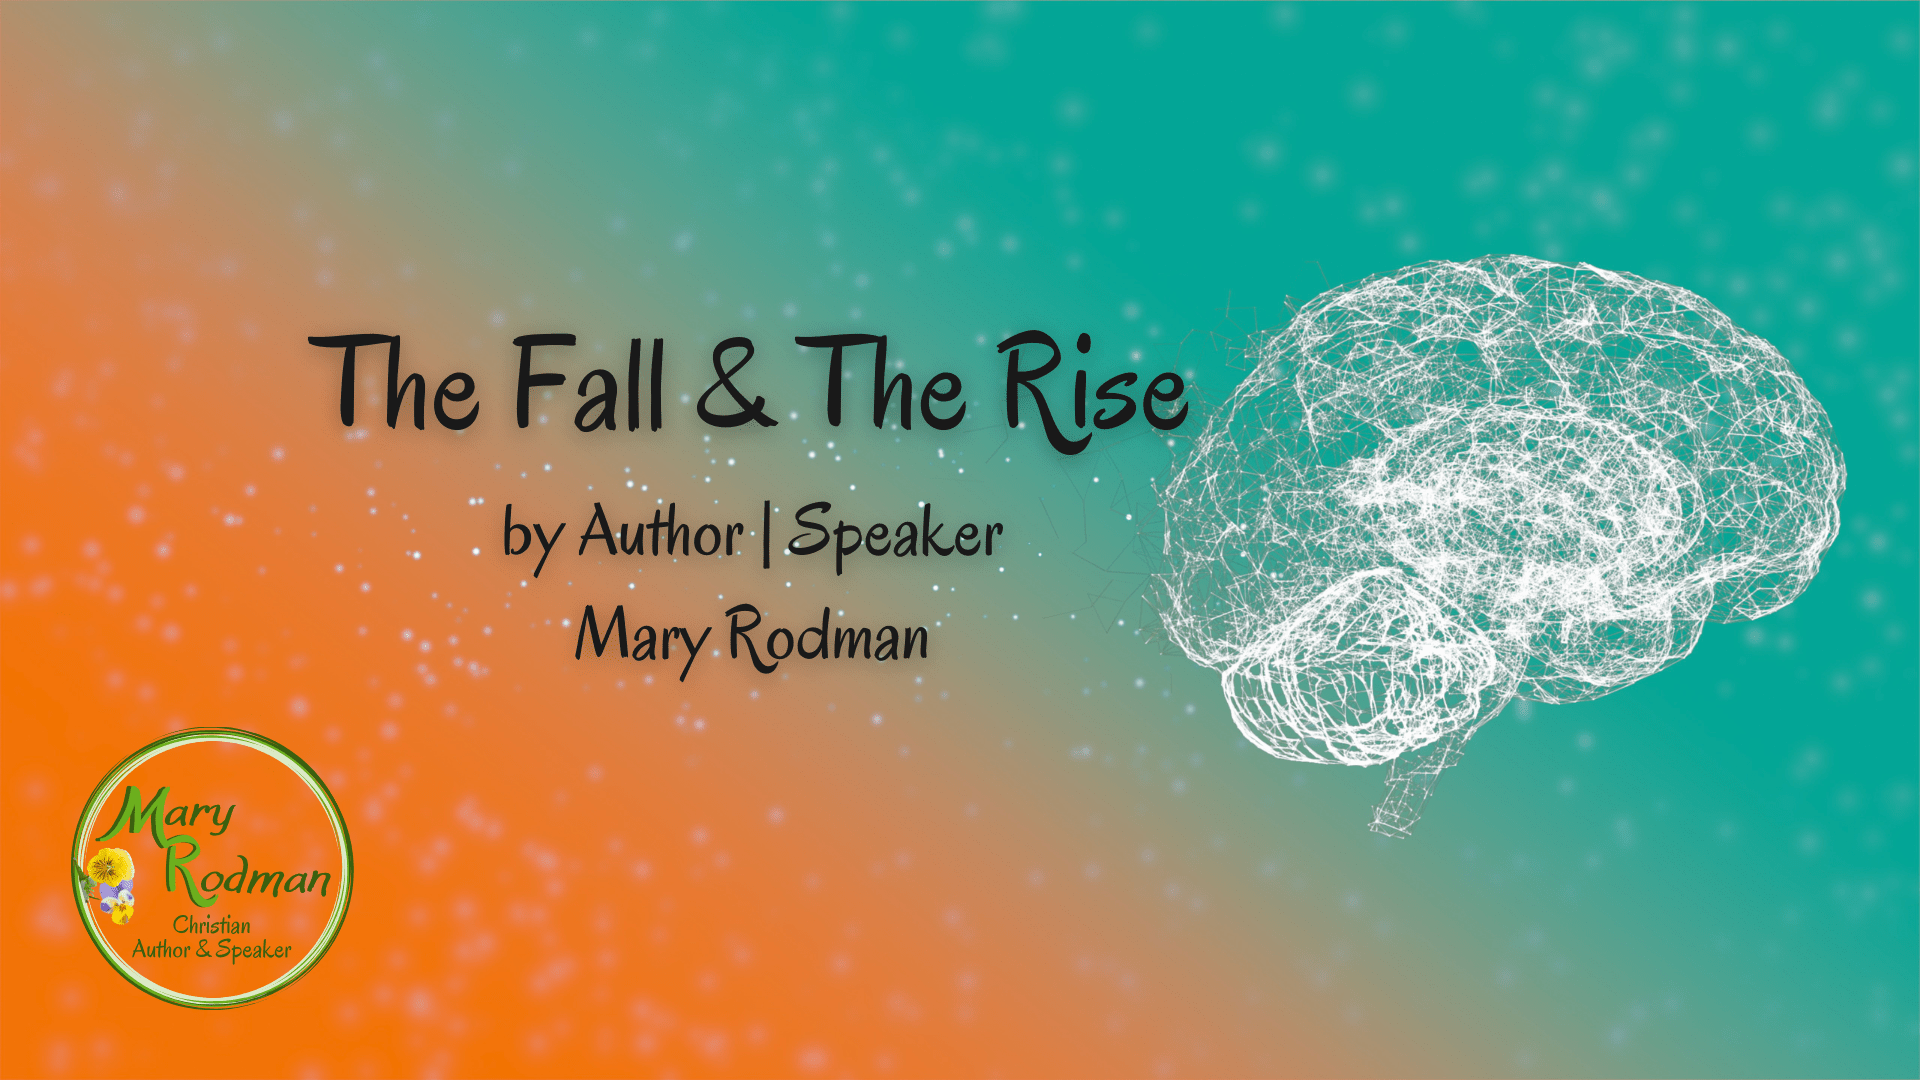 The Fall & The Rise